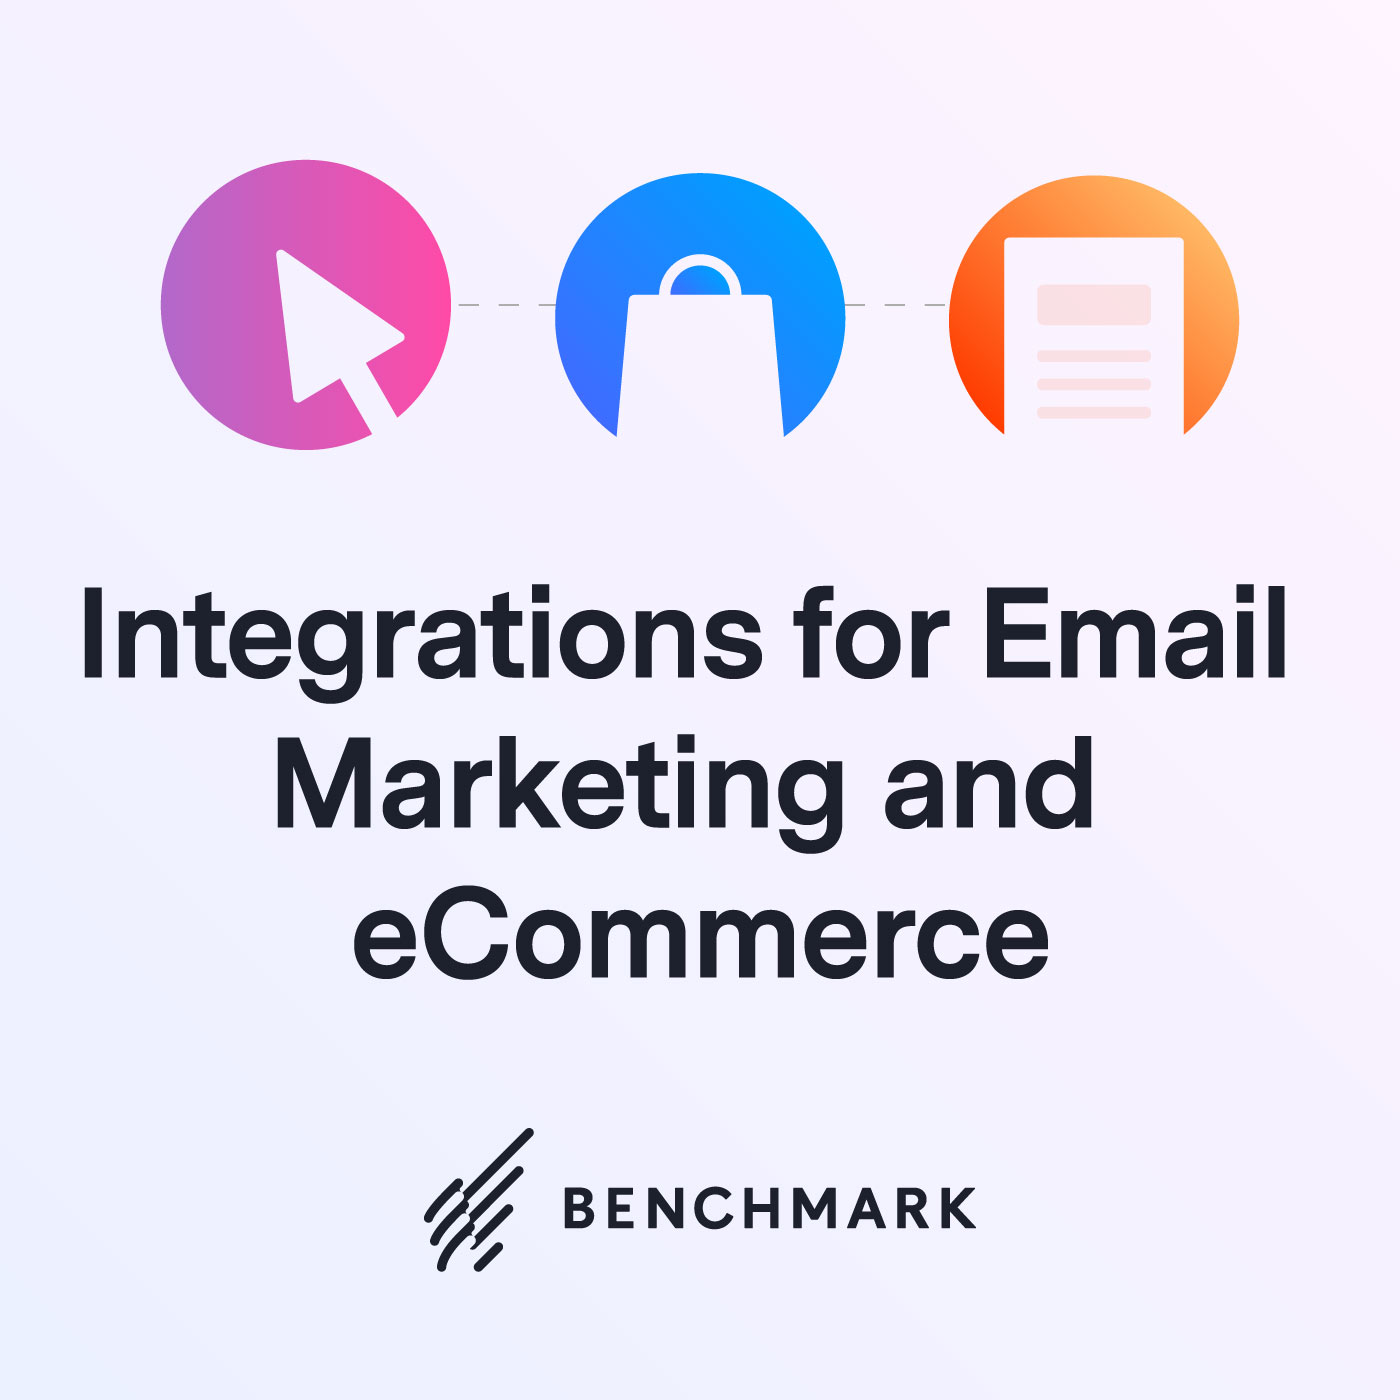  Top Integrations for Email Marketing and eCommerce